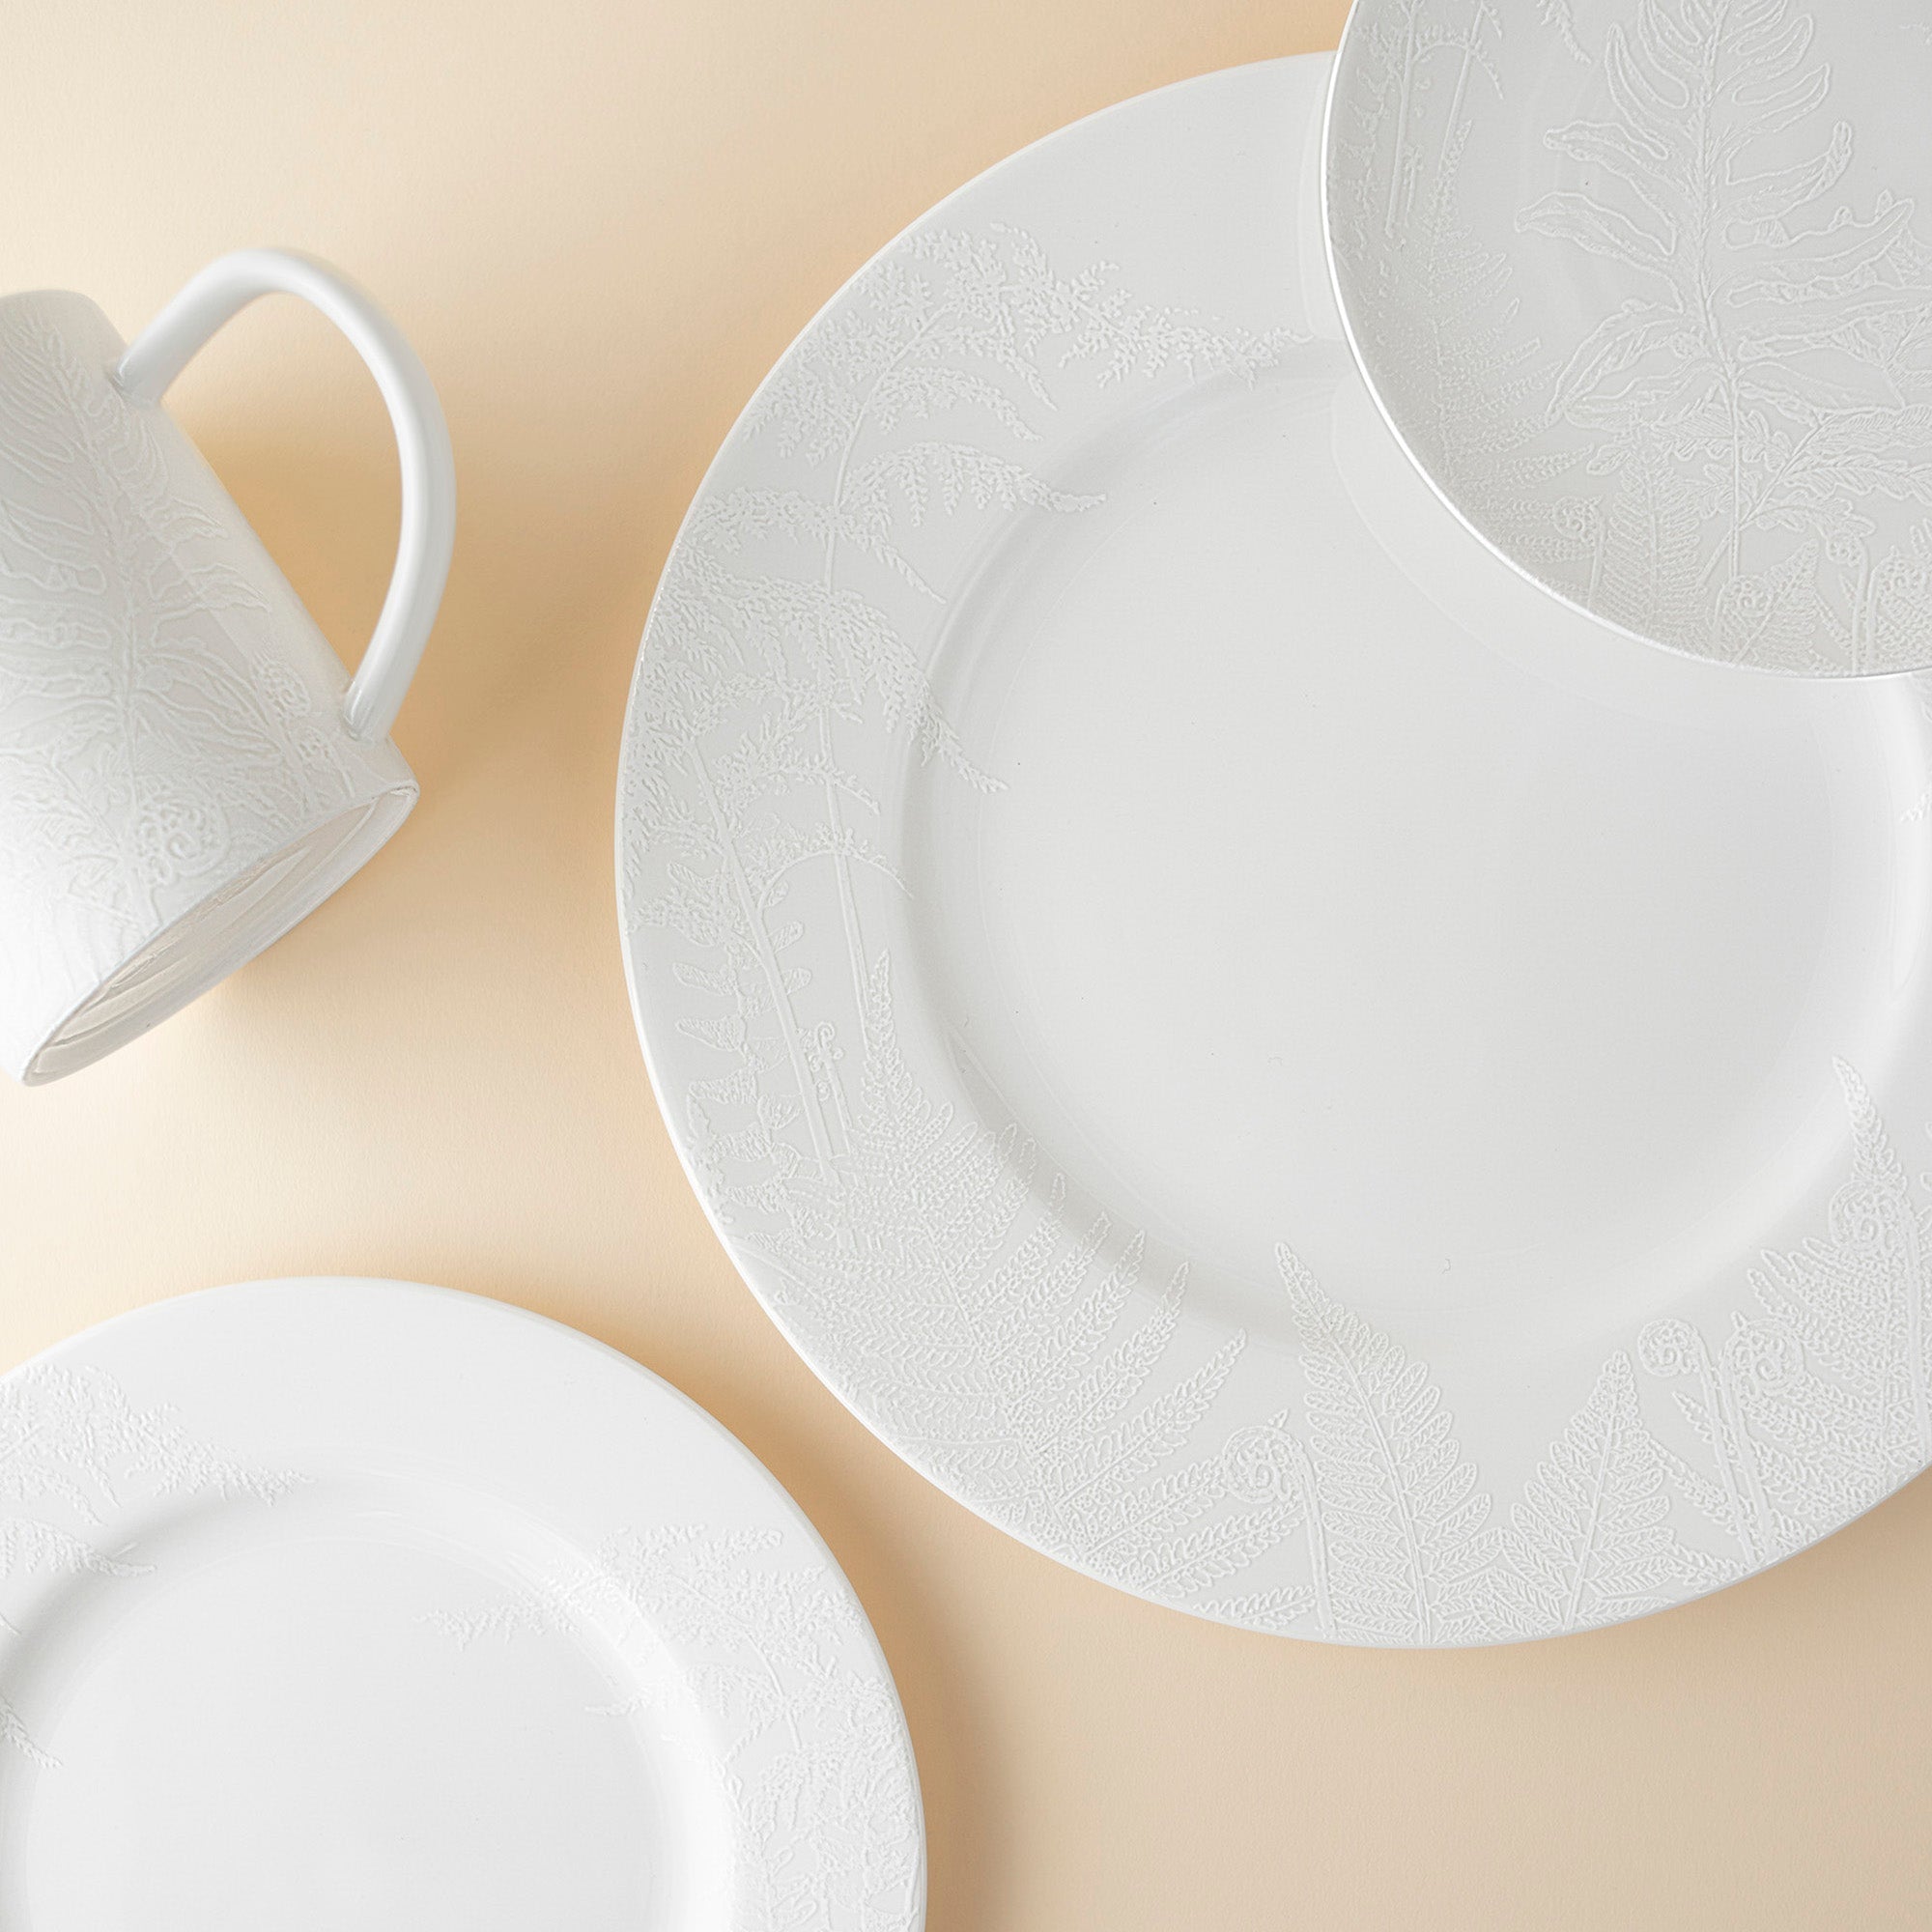 Four white ceramic plates with a subtle embossed fern pattern, part of the **Spring White Small Plates** set by **Caskata Artisanal Home**, arranged in a semi-circle.